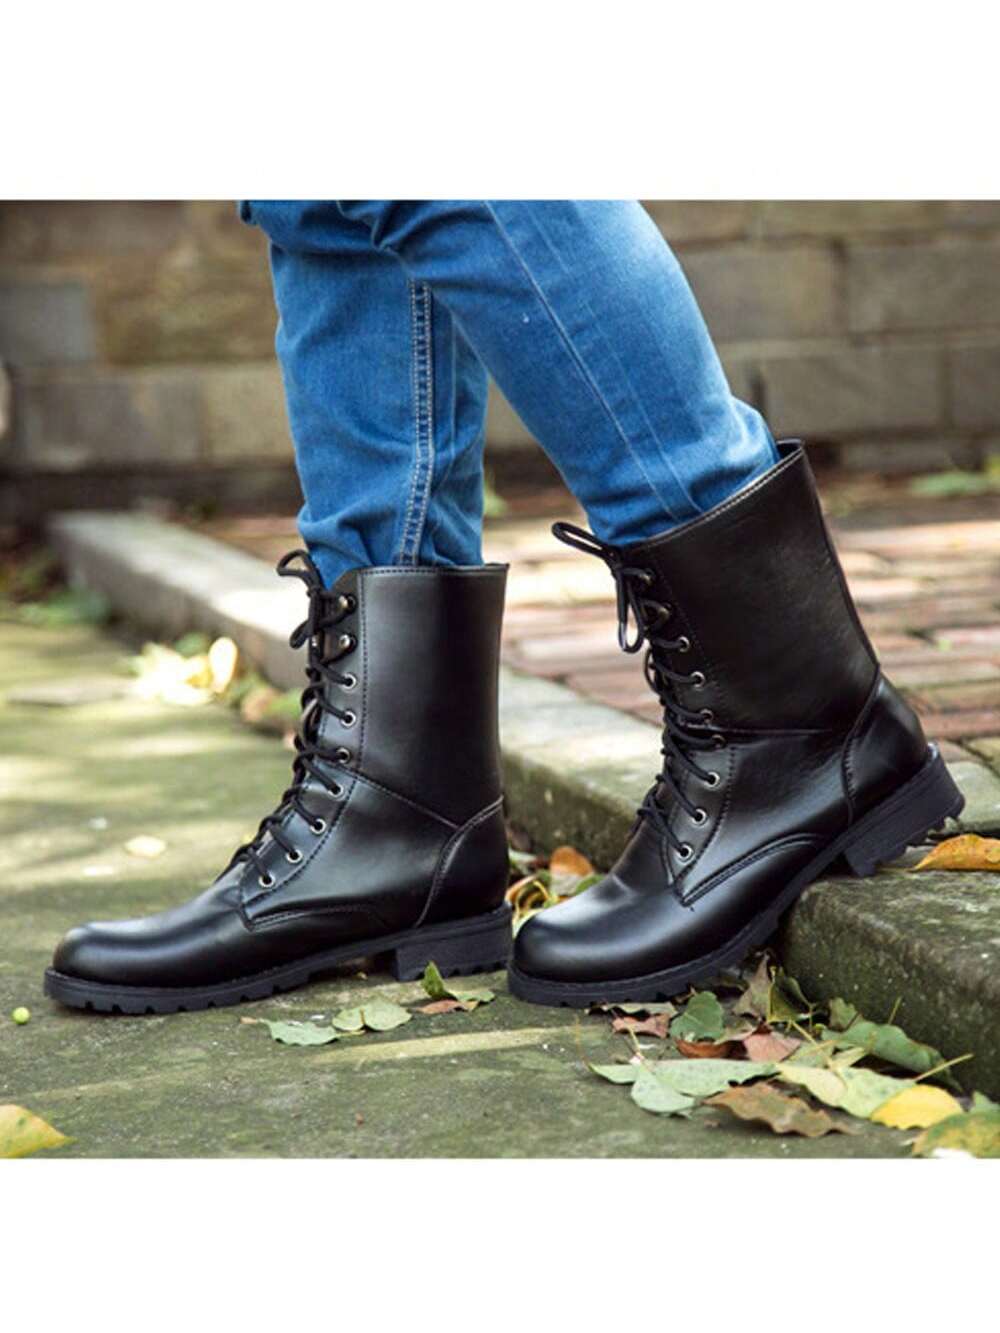 1 Pair Fashionable British-Style Mid-Heel Boots With Laces For Men And Women, Motorcycle Boots-Black-4